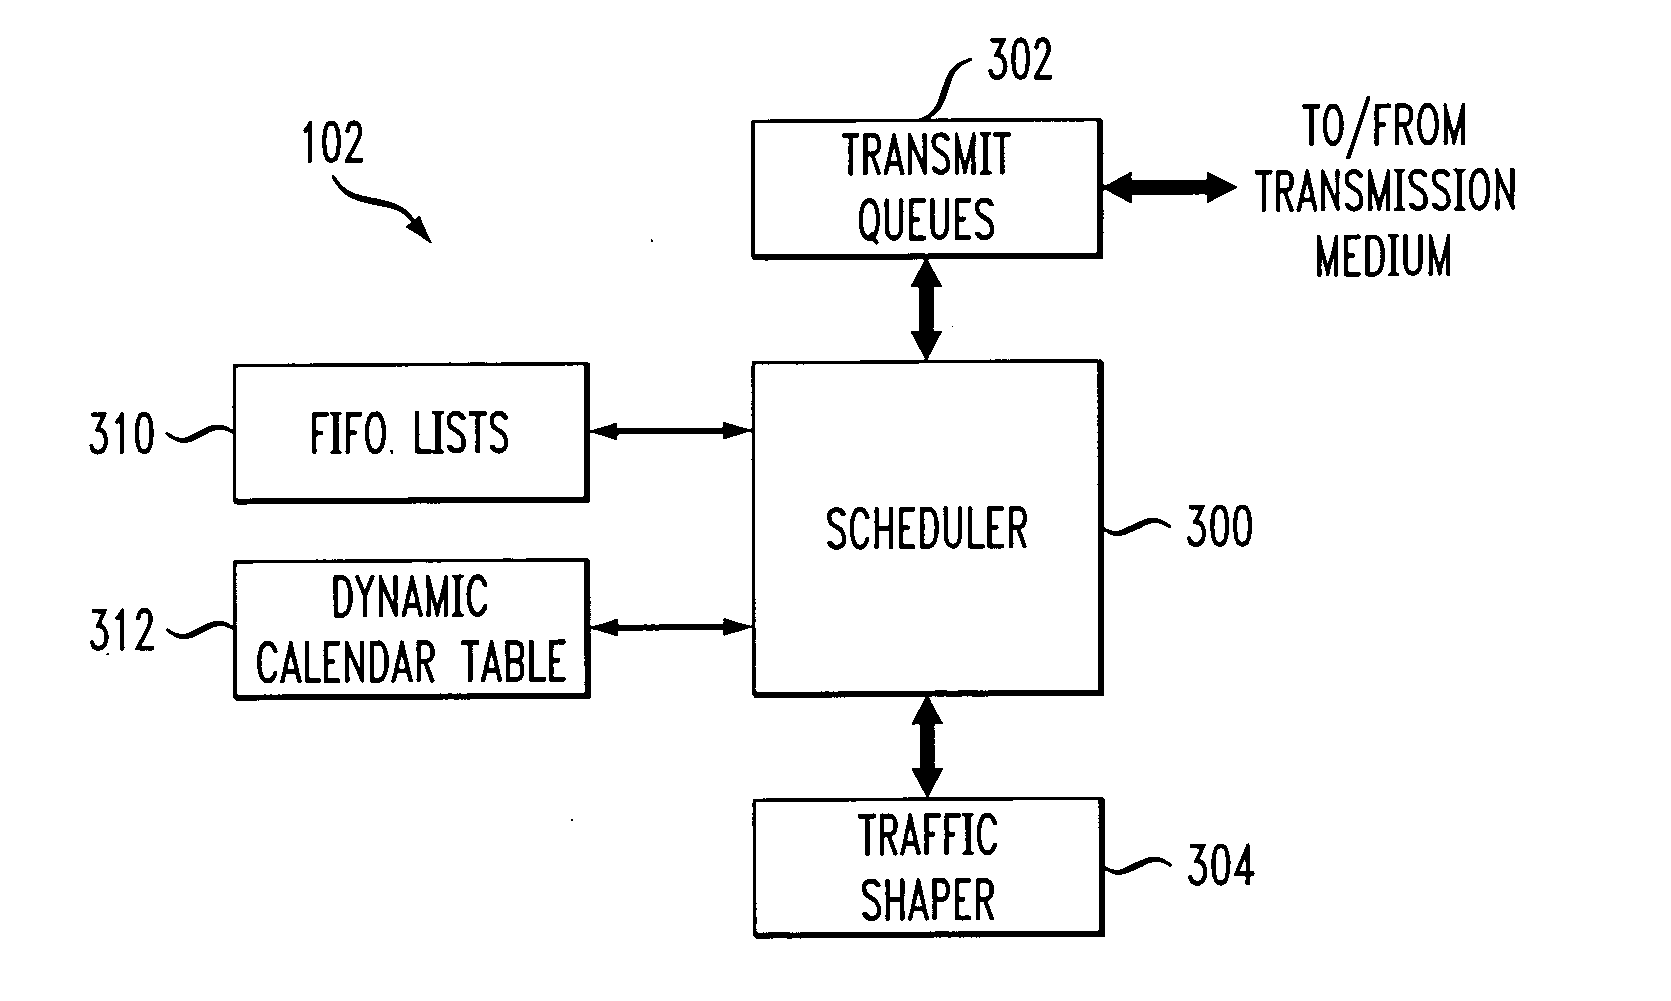 Processor with scheduler architecture supporting multiple distinct scheduling algorithms